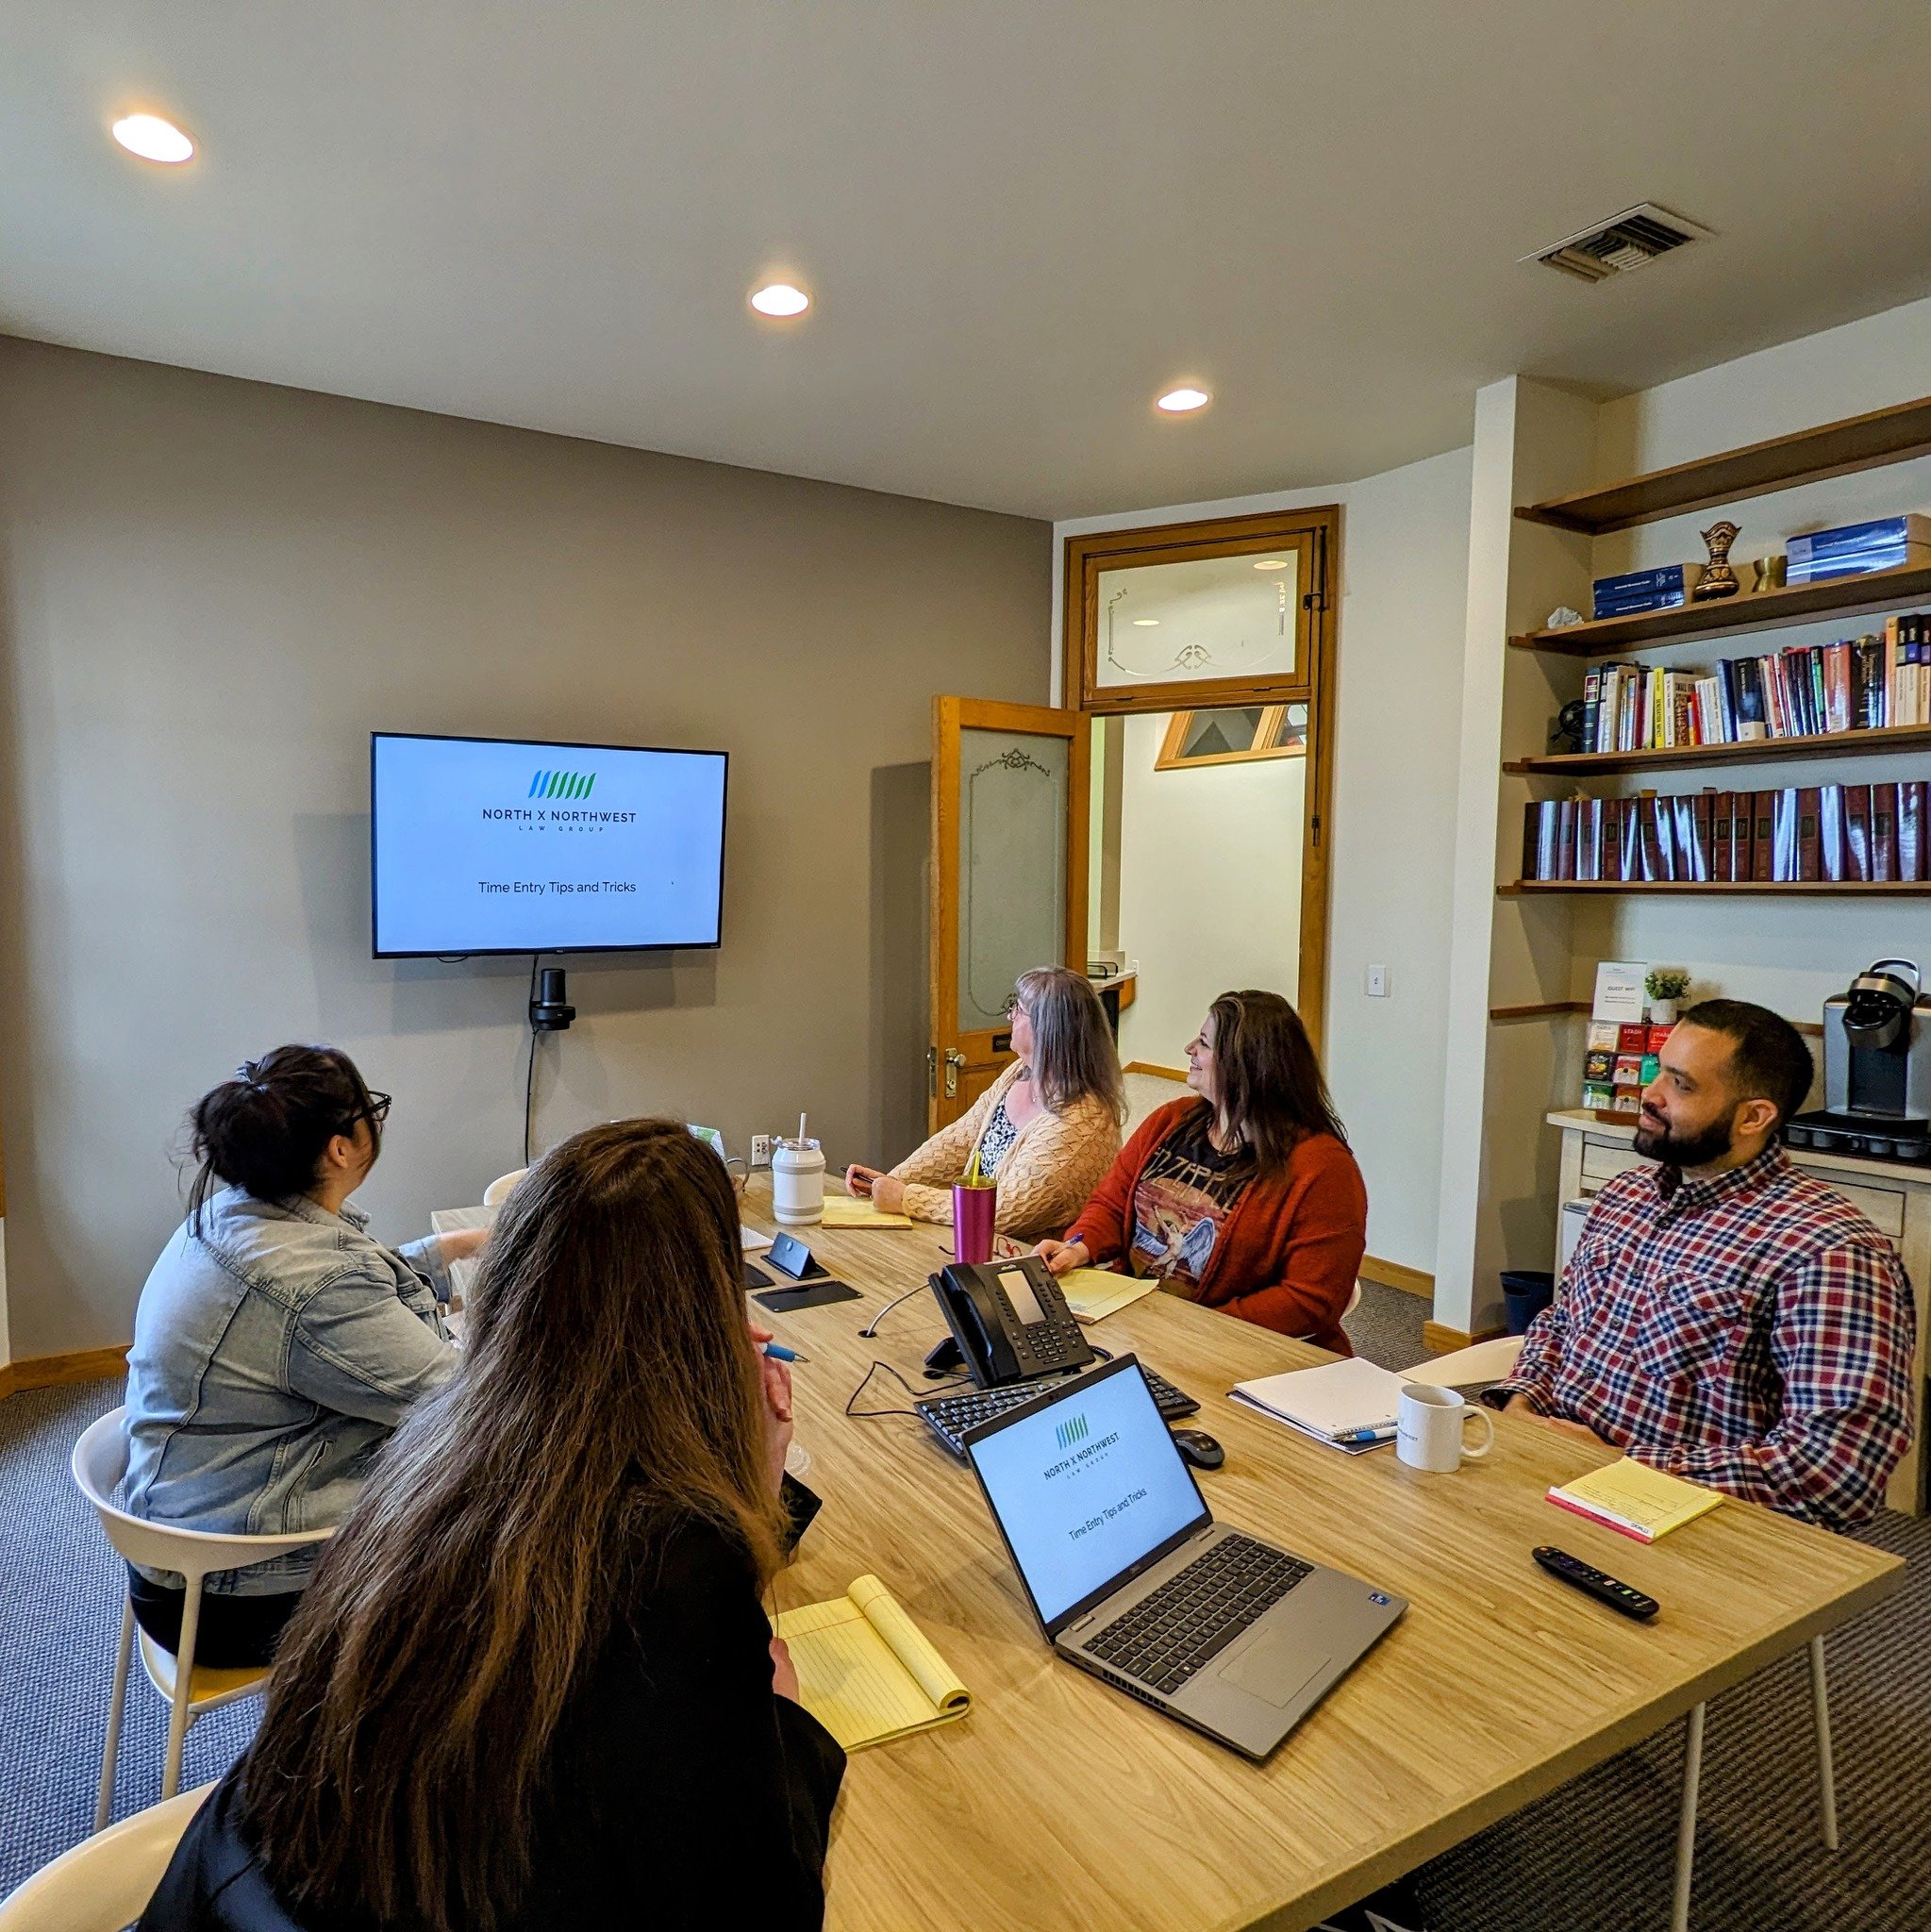 Every Friday the NxNW team gets together and we do a little 30 minute training. Topics range from the LLC formation process to imputed interest. Today we talked about how to improve our time entries. Learning is fun!

#lawfirm #tacomalawfirm #continu